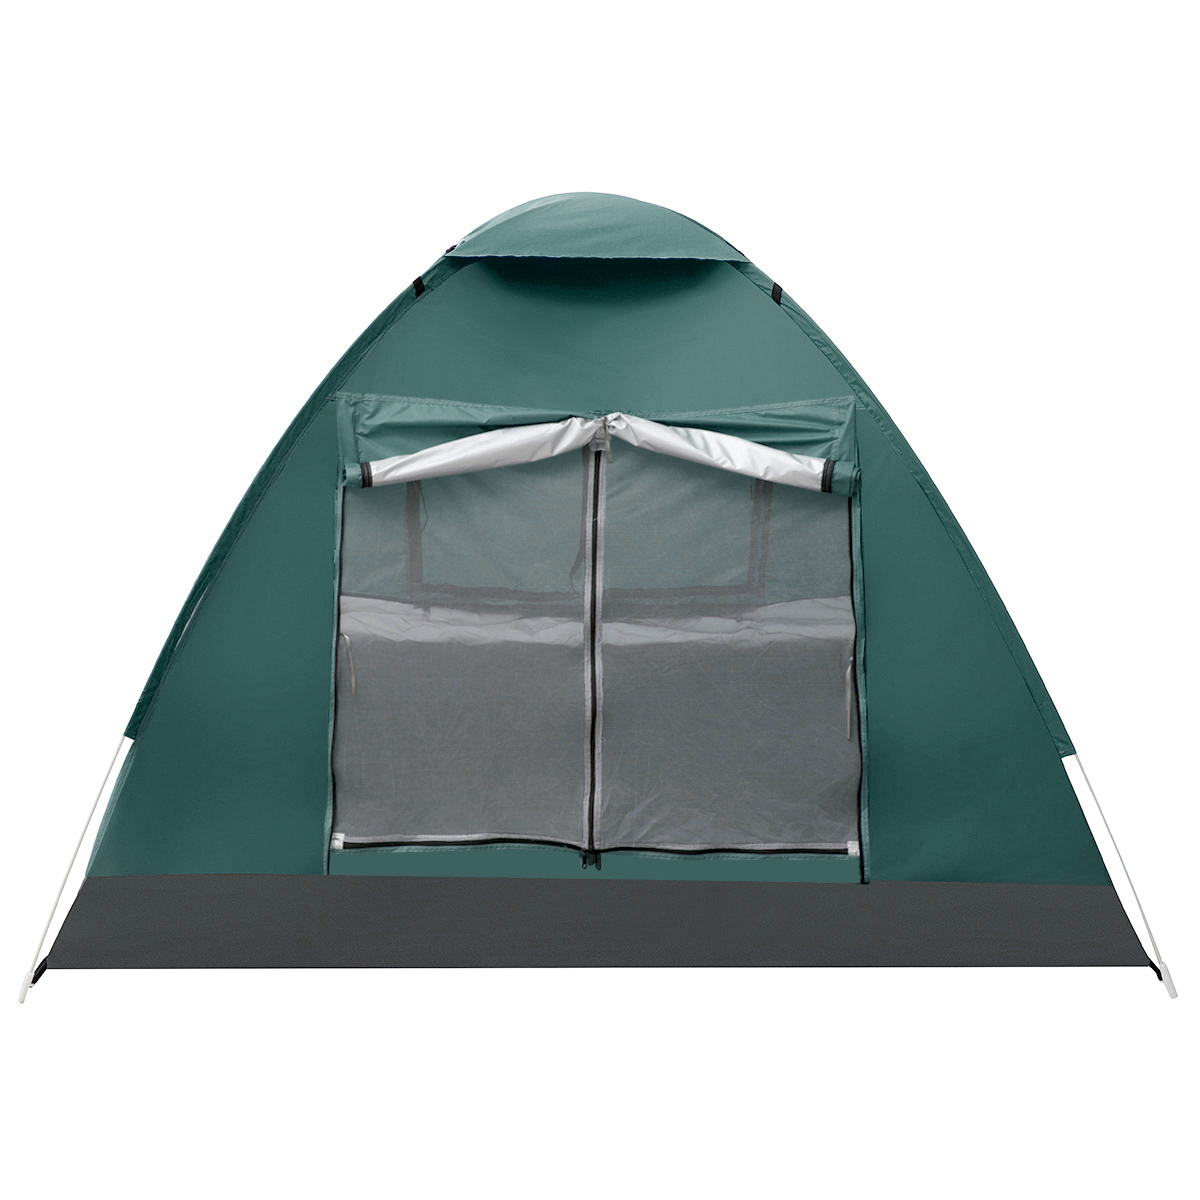 IPRee 3-4 Person Double Layer Camping Tent With Double Door Outdoor Waterproof Awning Tent 125x200x200cm for Fishing Camping Party